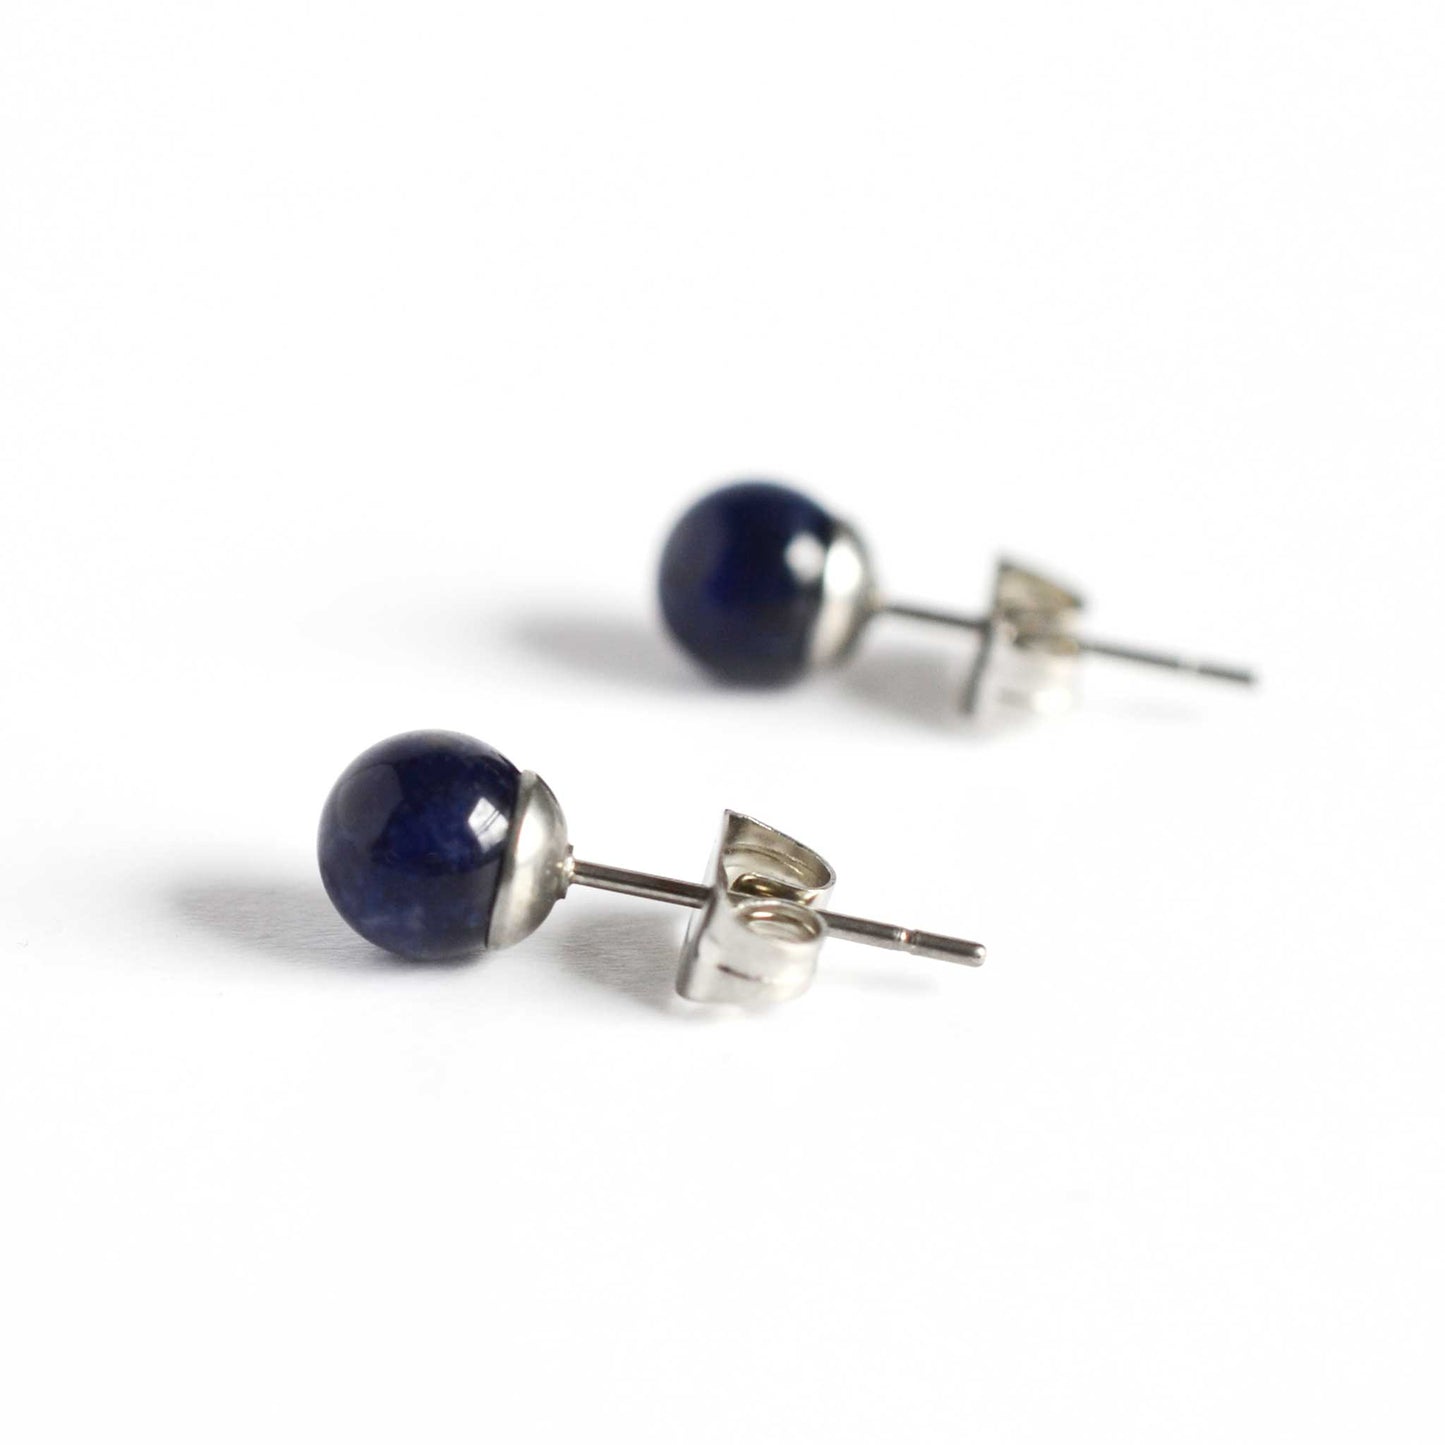 Side view of Sodalite ball stud earrings with hypoallergenic surgical steel posts and backs